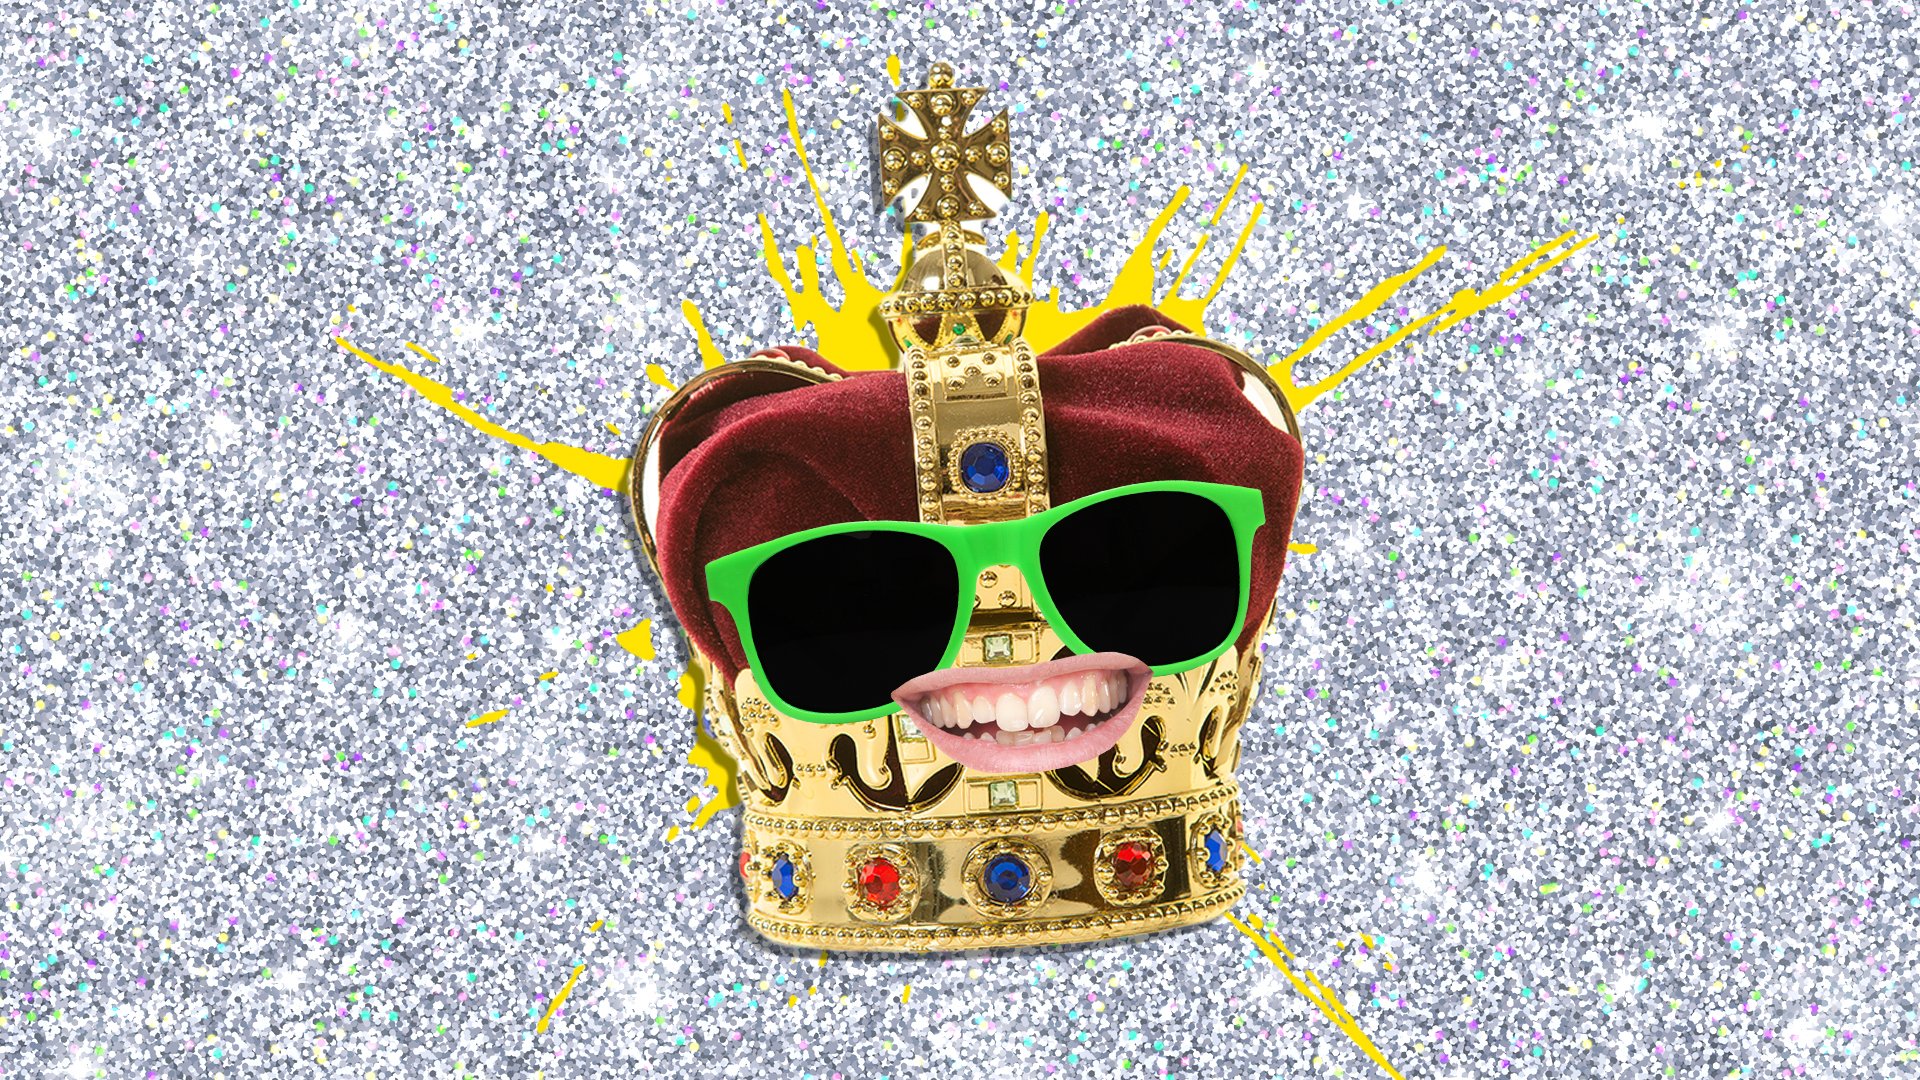 A crown on a sparkly background